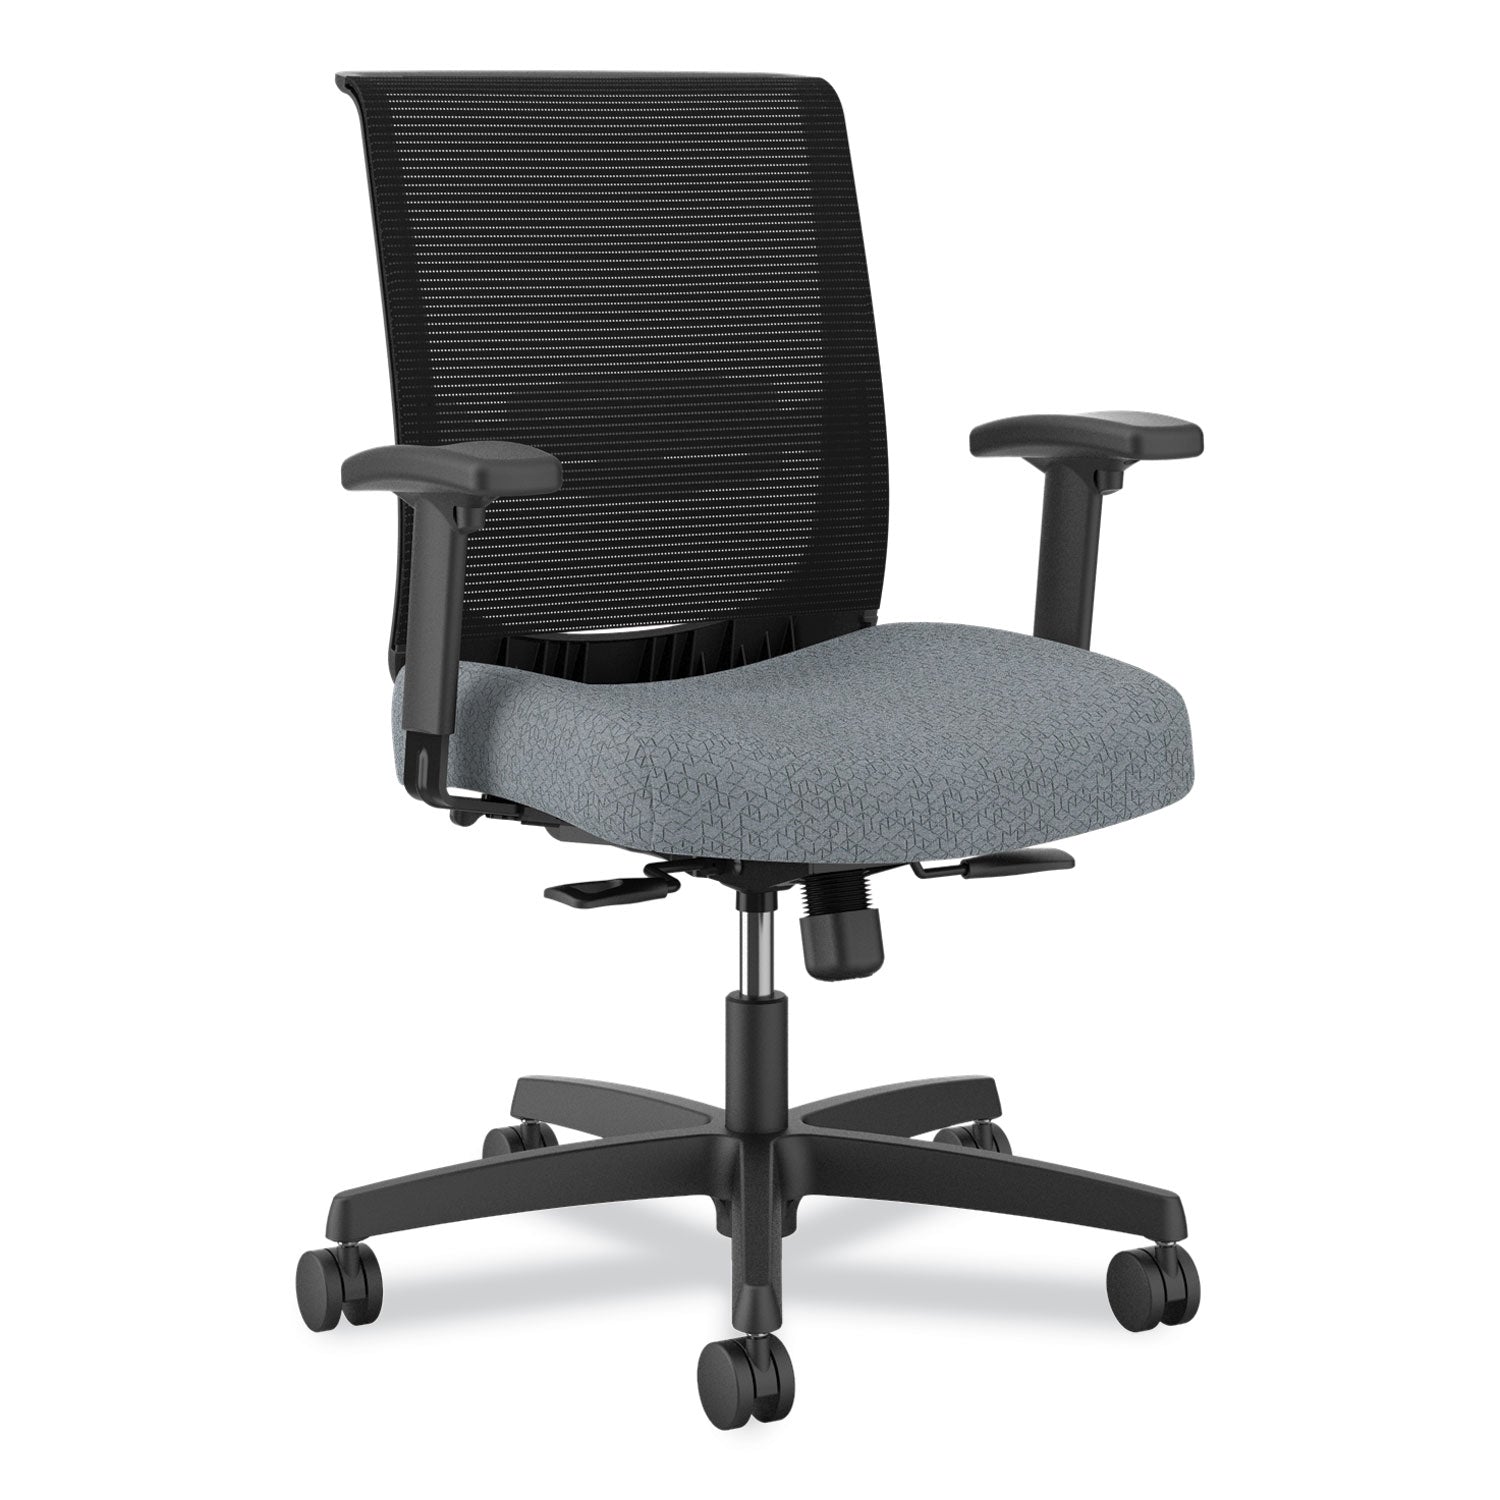 convergence-mid-back-task-chair-up-to-275-lb-165-to-21-seat-ht-basalt-seat-black-back-frame-ships-in-7-10-bus-days_honcmy1aapx25 - 1